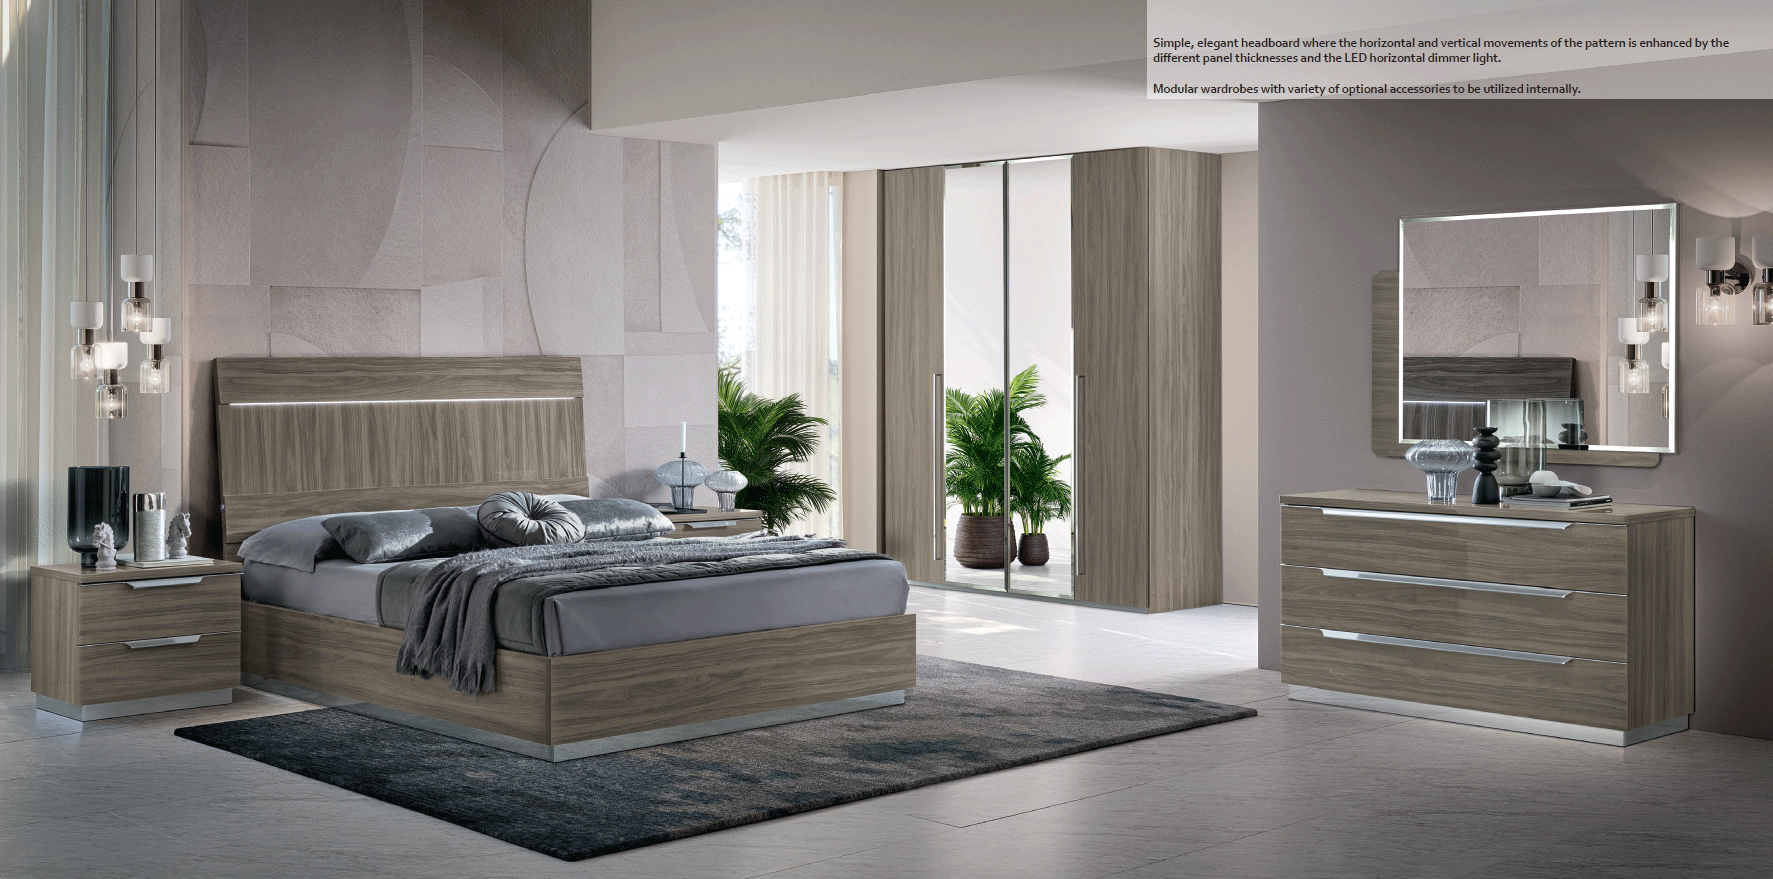 Brands Arredoclassic Bedroom, Italy Kroma Bedroom GREY Additional Items